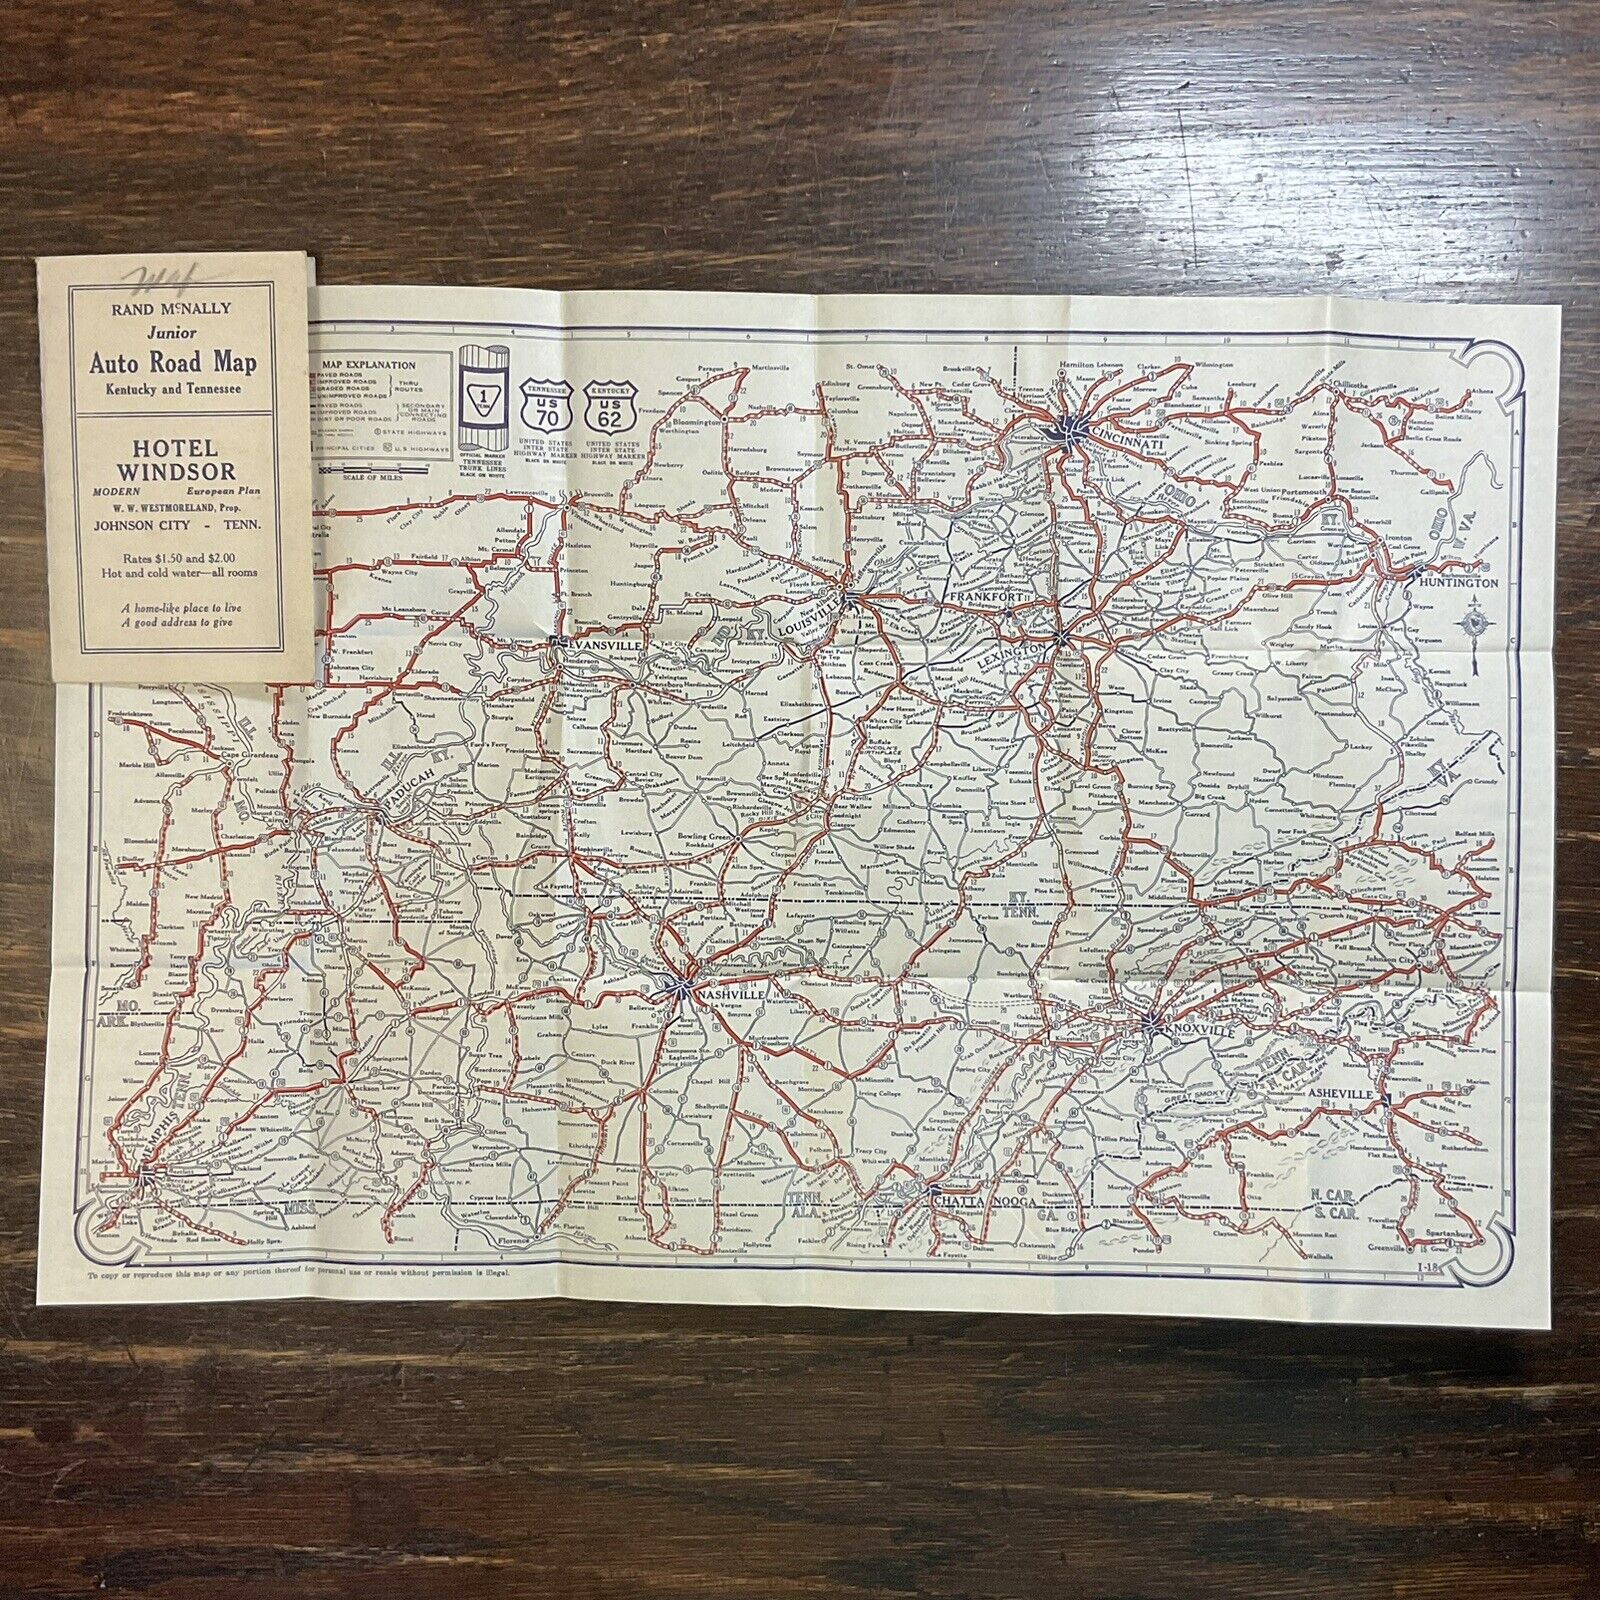 1925 AUTO TRAILS MAP KENTUCKY/TENNESSEE Rand McNally Junior, Frameable 12”x18”